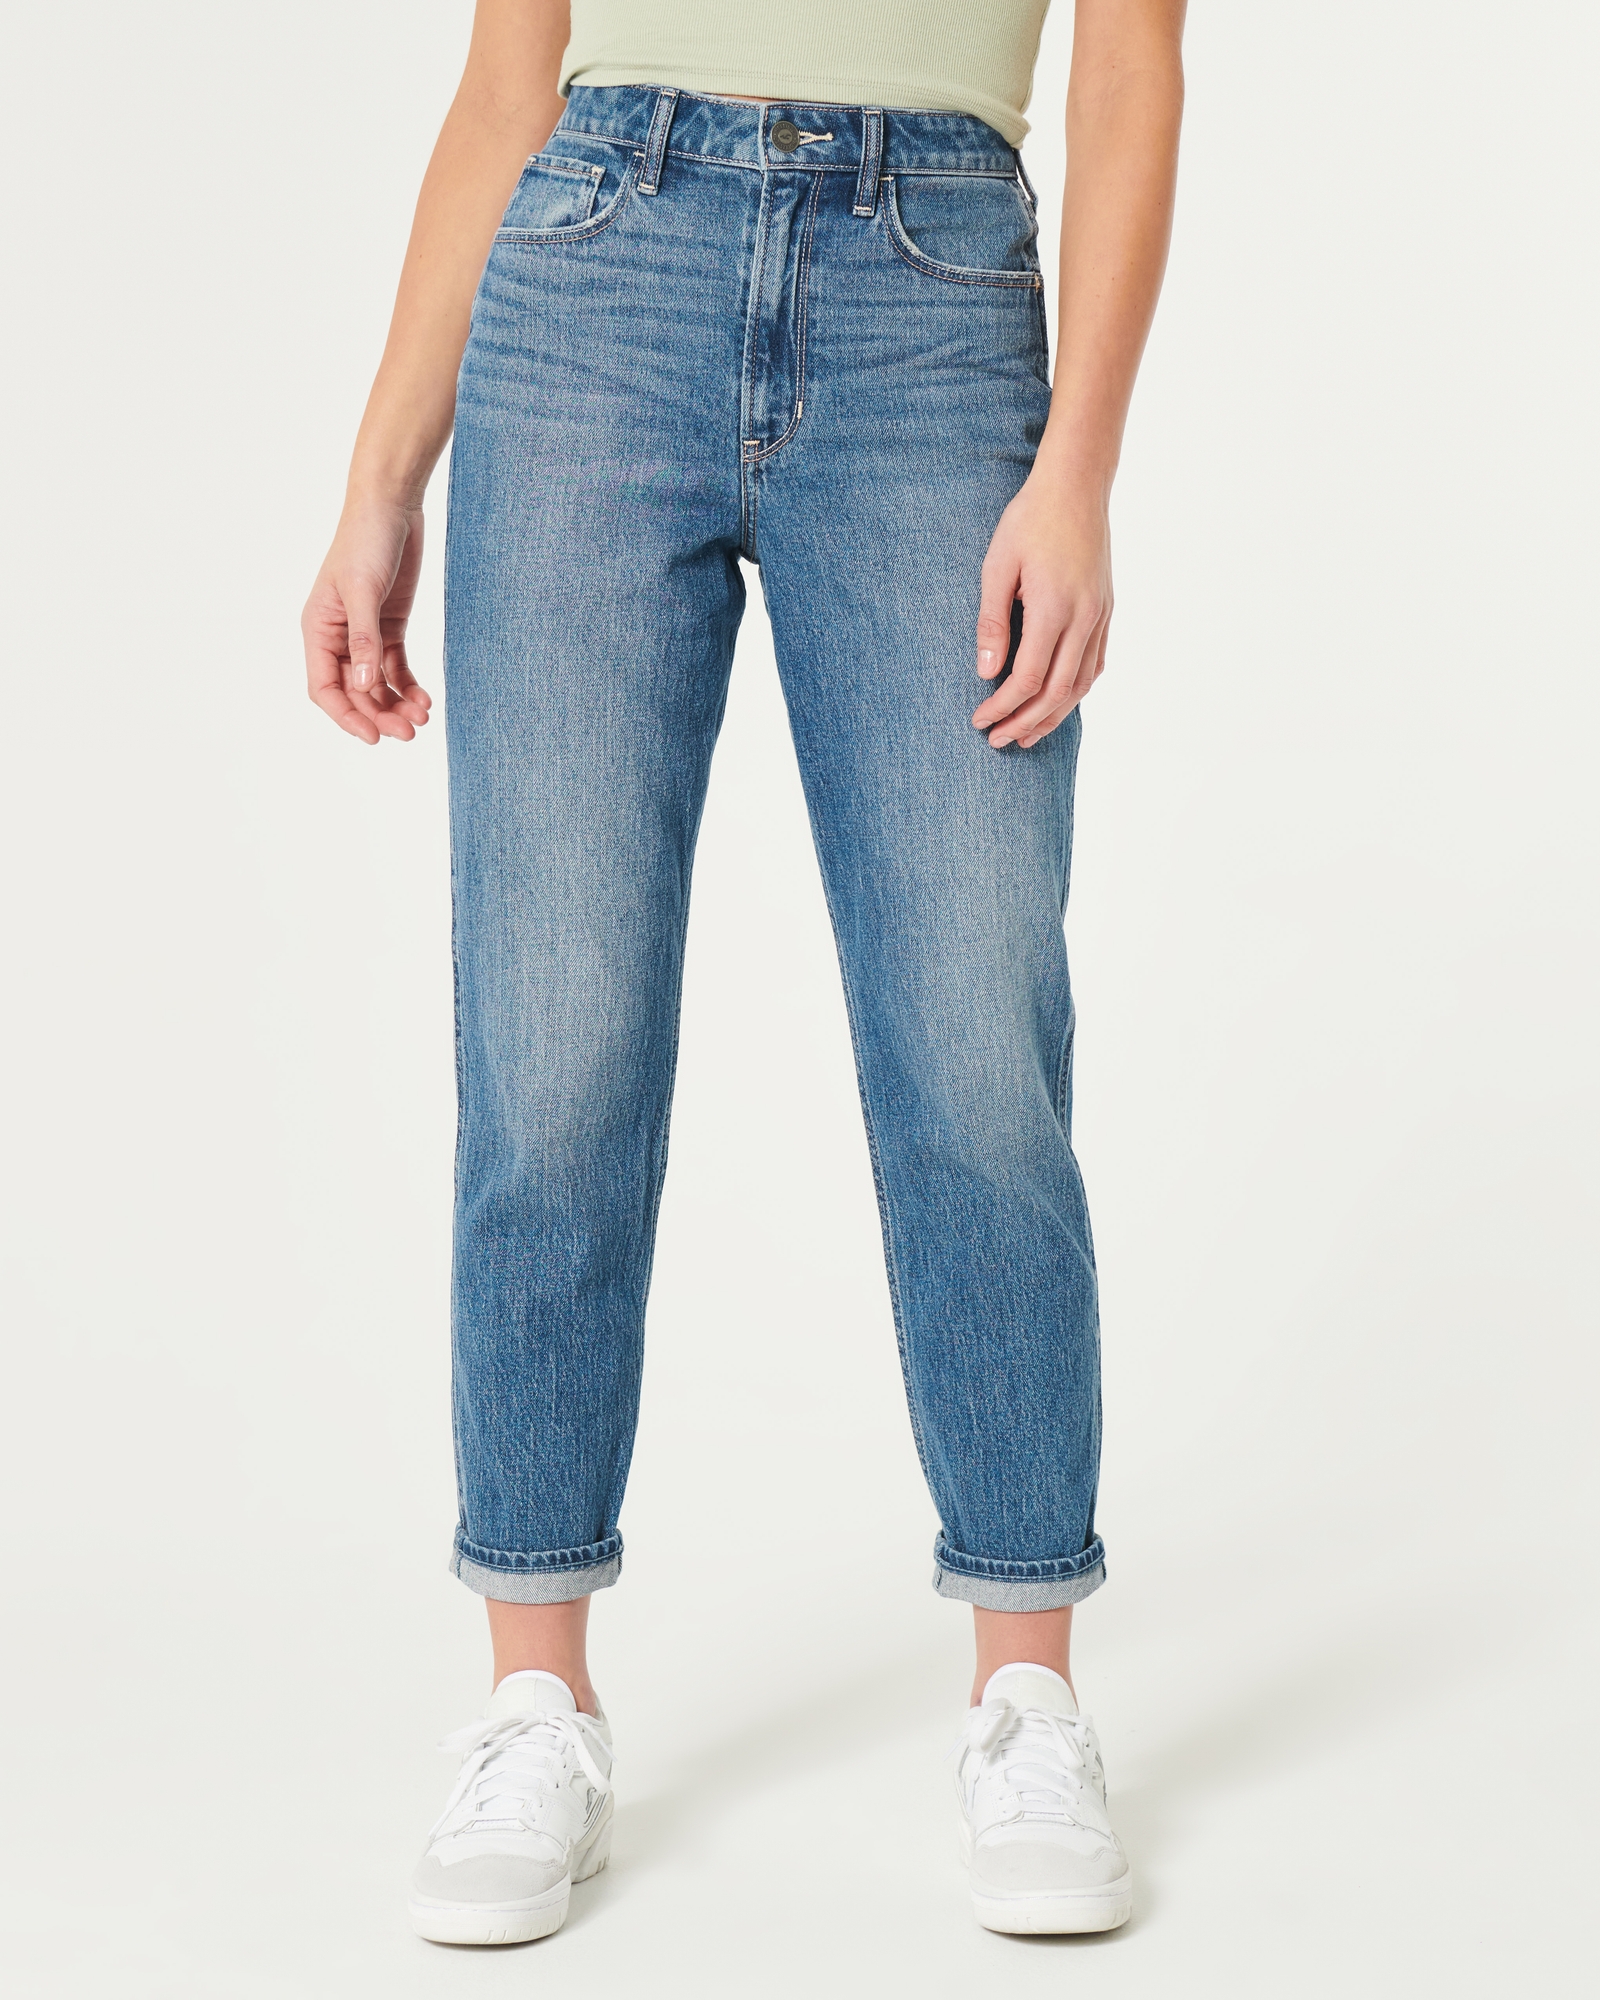 Hollister curvy ultra high rise mom jeans light wash distressed size 7S -  $28 - From Krista